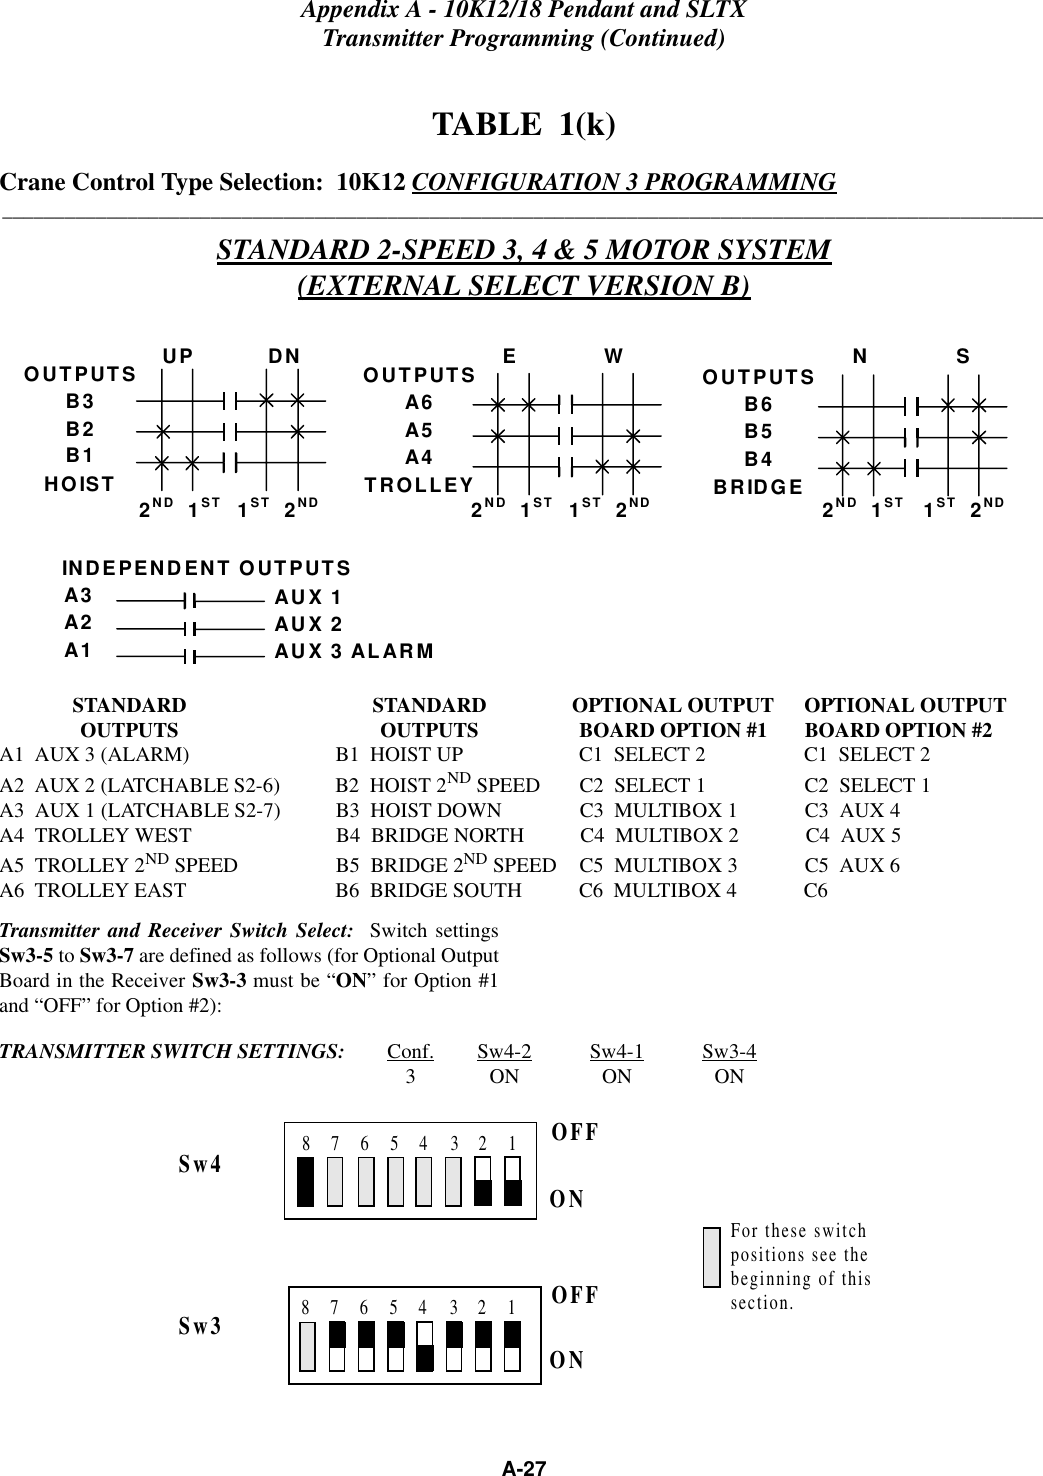 Appendix A - 10K12/18 Pendant and SLTXTransmitter Programming (Continued)A-27TABLE  1(k)Crane Control Type Selection:  10K12 CONFIGURATION 3 PROGRAMMING____________________________________________________________________________________________________STANDARD 2-SPEED 3, 4 &amp; 5 MOTOR SYSTEM(EXTERNAL SELECT VERSION B)STANDARD STANDARD OPTIONAL OUTPUT OPTIONAL OUTPUTOUTPUTS OUTPUTS BOARD OPTION #1 BOARD OPTION #2A1  AUX 3 (ALARM) B1  HOIST UP C1  SELECT 2 C1  SELECT 2A2  AUX 2 (LATCHABLE S2-6) B2  HOIST 2ND SPEED C2  SELECT 1 C2  SELECT 1A3  AUX 1 (LATCHABLE S2-7) B3  HOIST DOWN C3  MULTIBOX 1 C3  AUX 4A4  TROLLEY WEST B4  BRIDGE NORTH C4  MULTIBOX 2 C4  AUX 5A5  TROLLEY 2ND SPEED B5  BRIDGE 2ND SPEED C5  MULTIBOX 3 C5  AUX 6A6  TROLLEY EAST B6  BRIDGE SOUTH C6  MULTIBOX 4 C6Transmitter and Receiver Switch Select:  Switch settingsSw3-5 to Sw3-7 are defined as follows (for Optional OutputBoard in the Receiver Sw3-3 must be “ON” for Option #1and “OFF” for Option #2):TRANSMITTER SWITCH SETTINGS: Conf. Sw4-2 Sw4-1 Sw3-43ONONONOUTPUTSB3B2B1HOISTOUTPUTSA6A5A4TROLLEYOUTPUTSB6B5B4BRIDGEA3A2A1AUX 1AUX 2AUX 3 ALARM2ND  1ST 1ST  2ND 1ST  2ND 1ST  2NDUP           DN E             W N             SINDEPENDENT OUTPUTS2ND  1ST 2ND  1STOFFONSw4Sw3 OFFONFor these switchpositions see thebeginning of thissection.1823456718234567